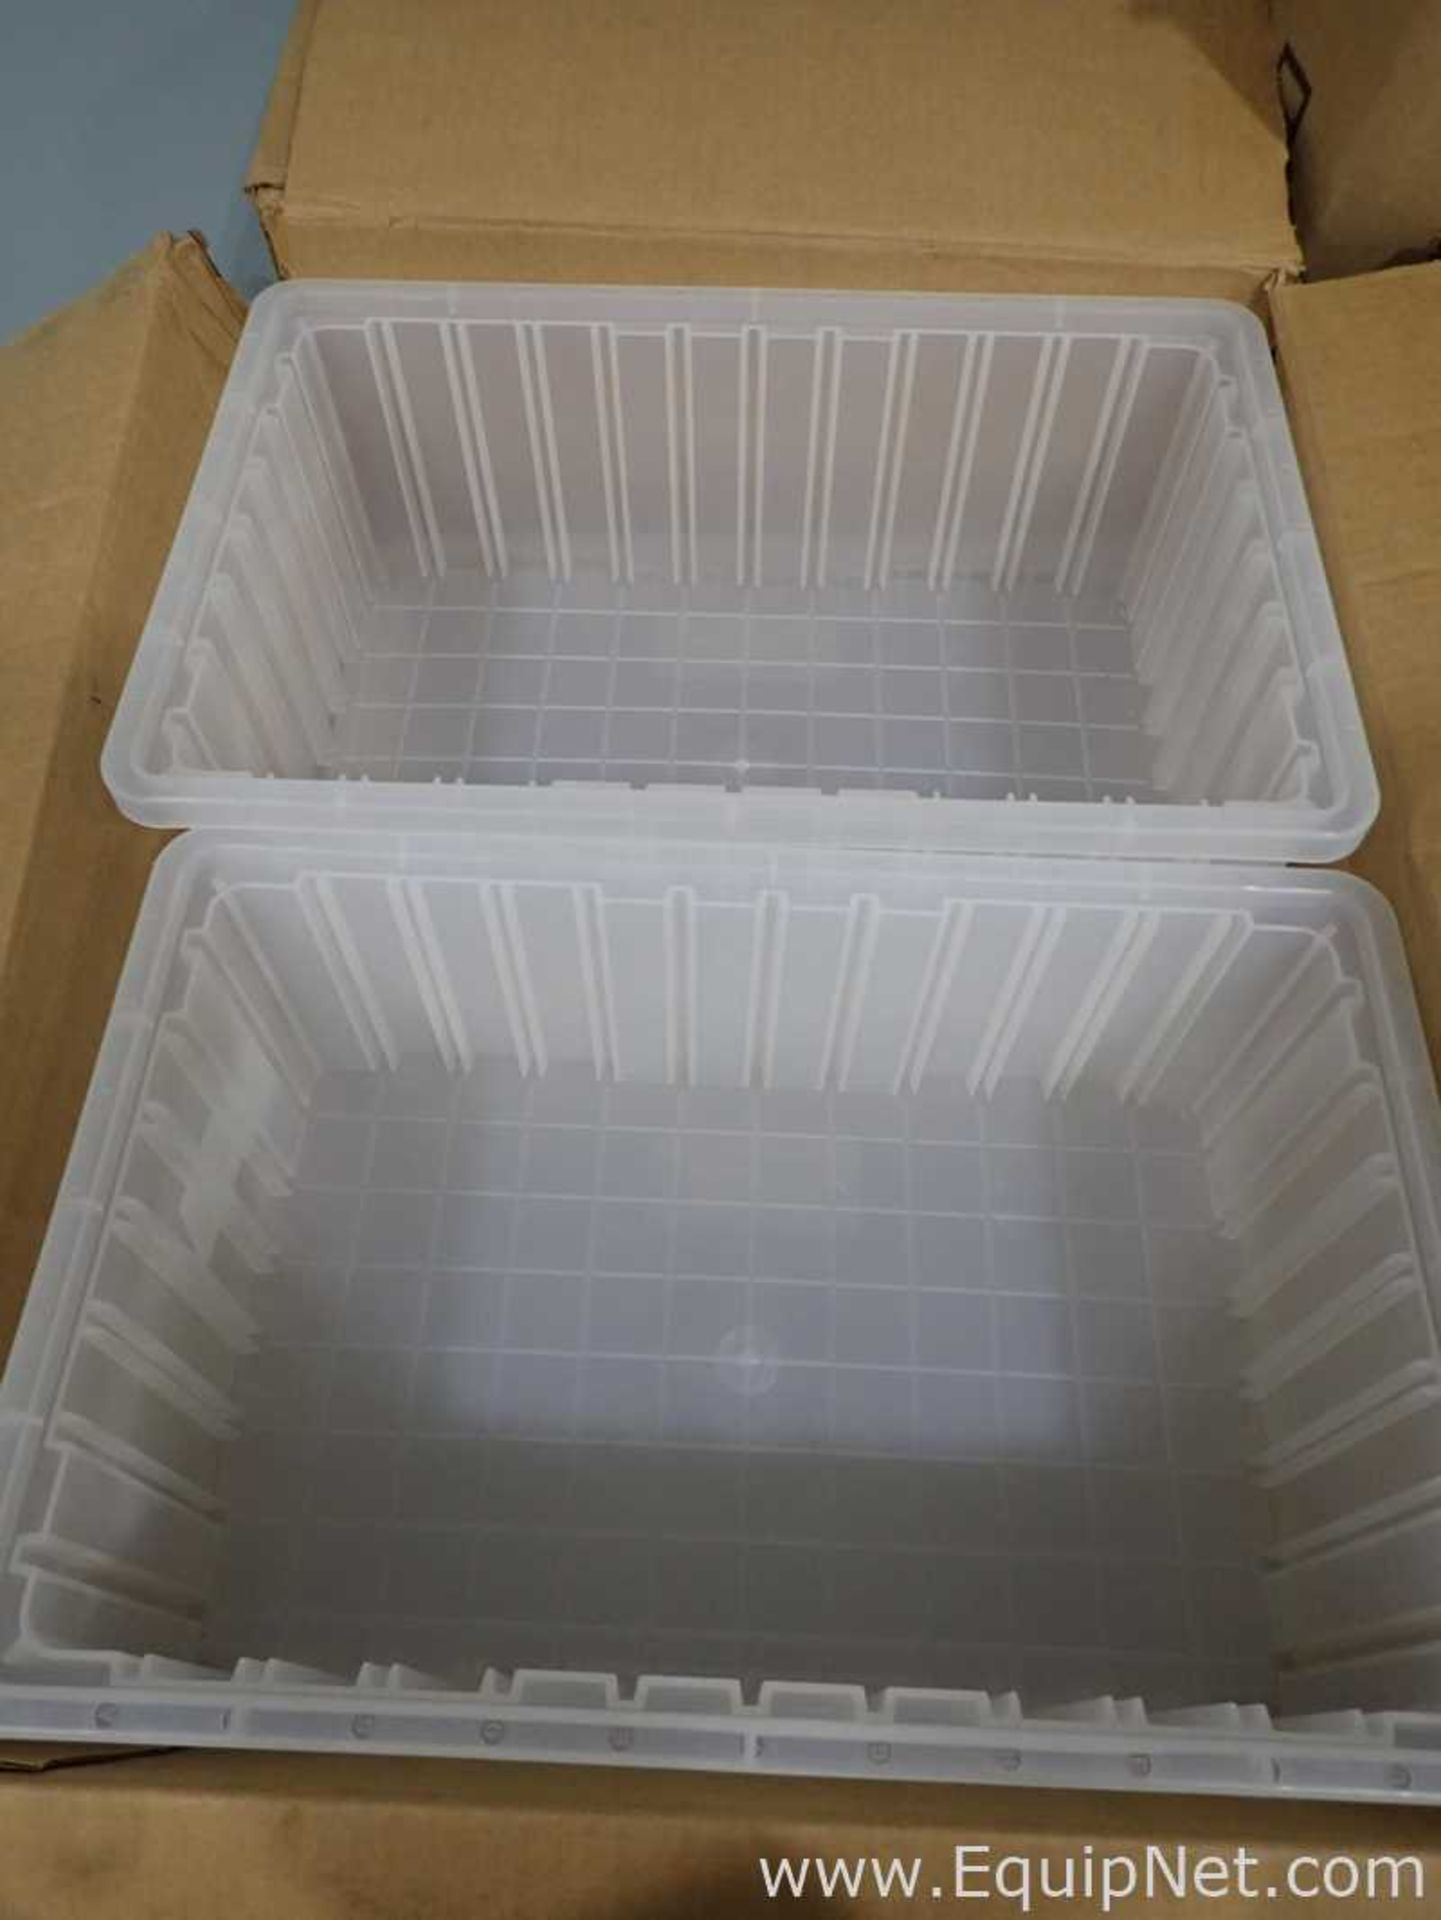 Lot of Approximately 55 Quantum Storage Systems DG92060CL Clear Dividable Grid Containers - Image 7 of 10